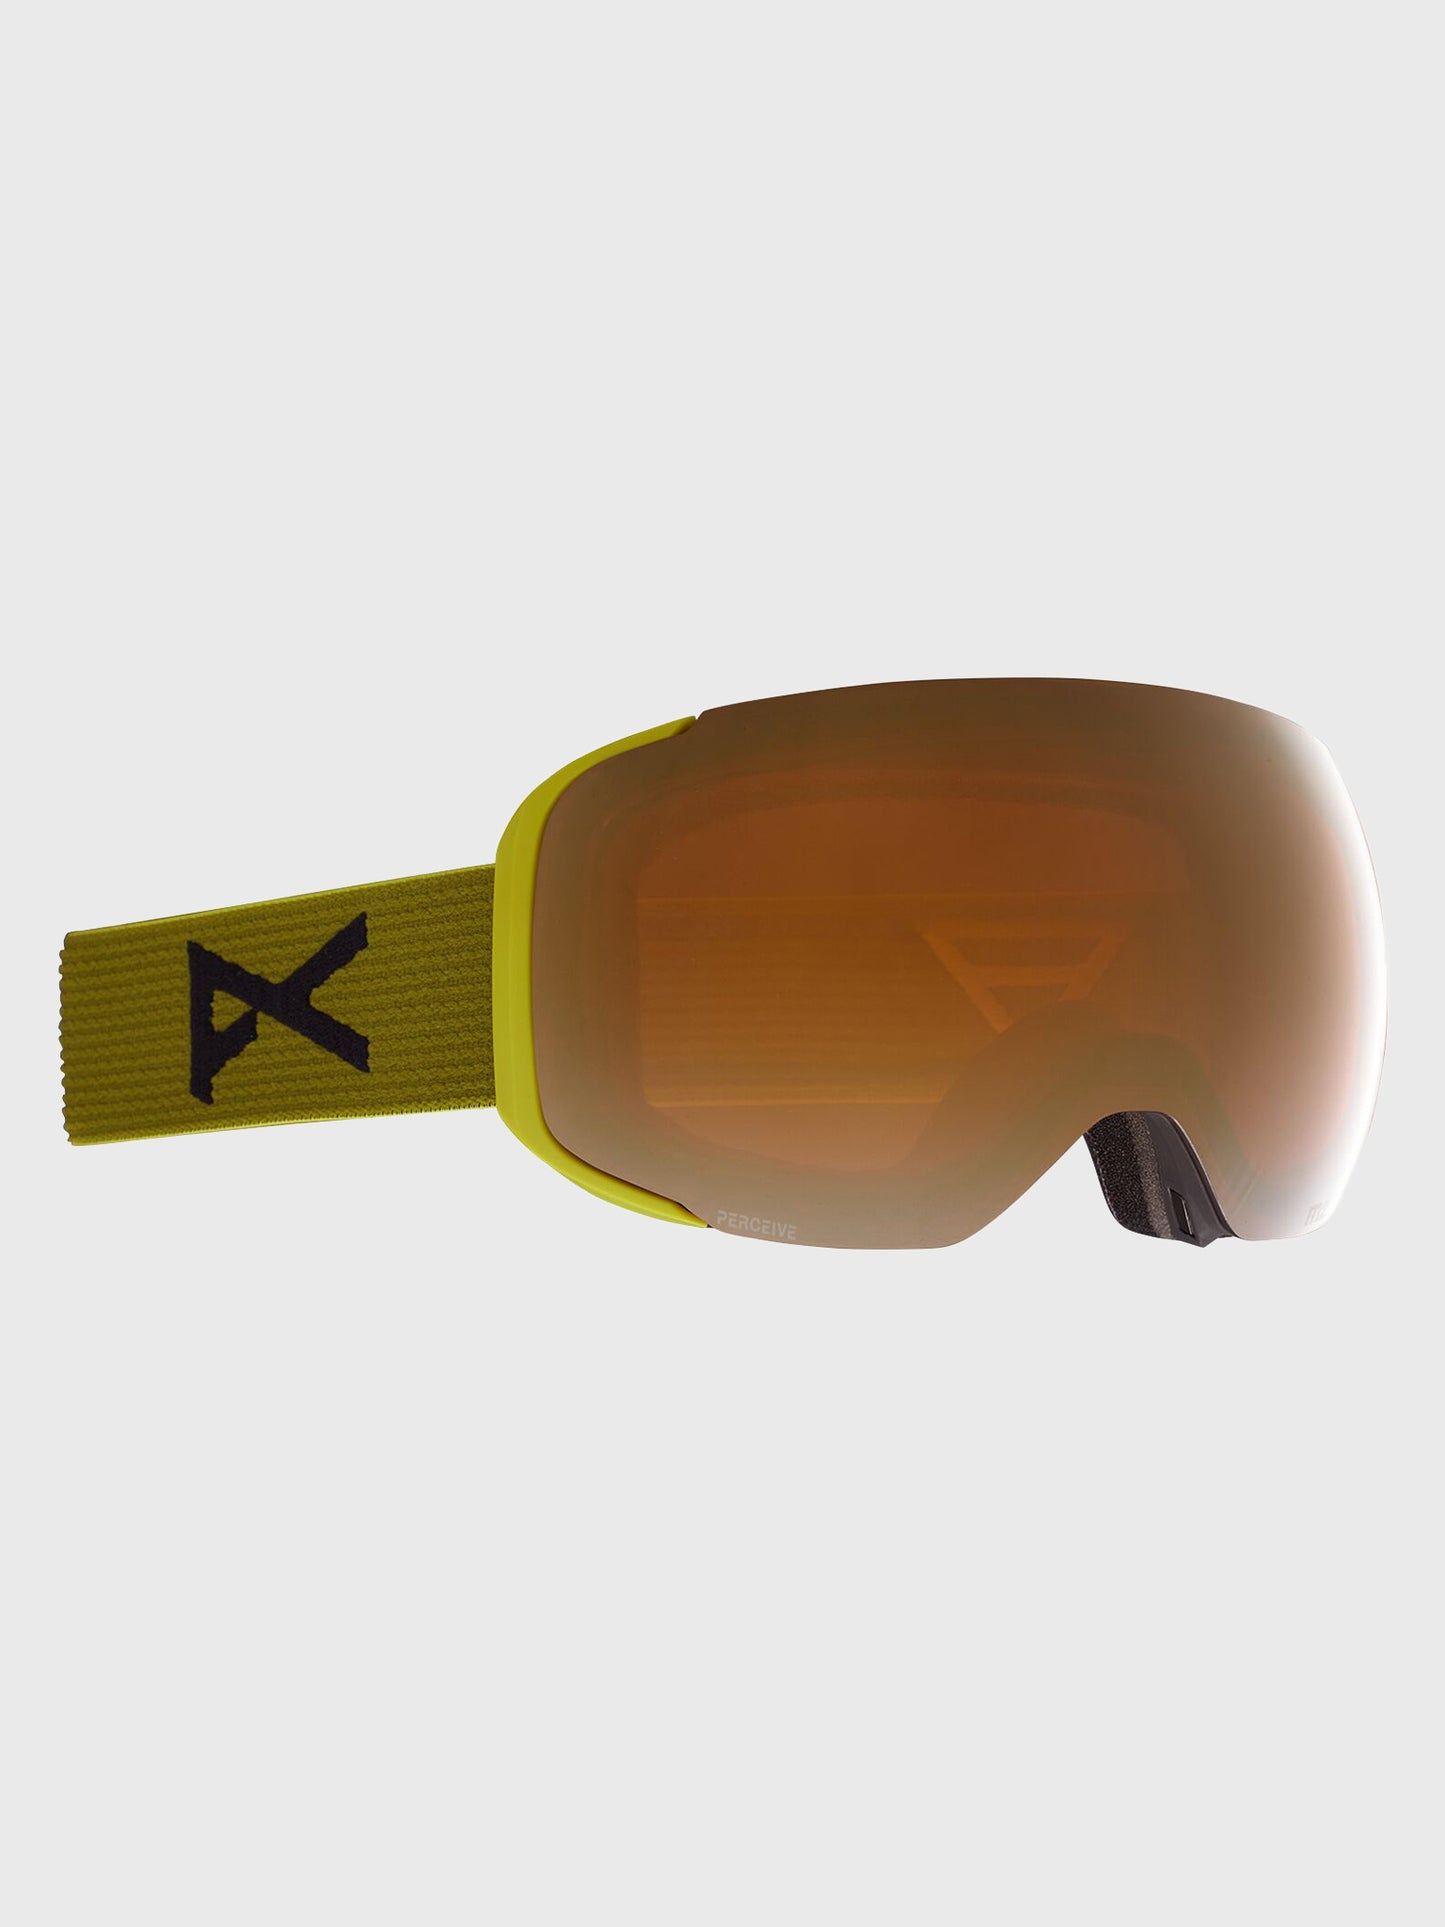 Anon Men's M2 Goggles with Spare Lens